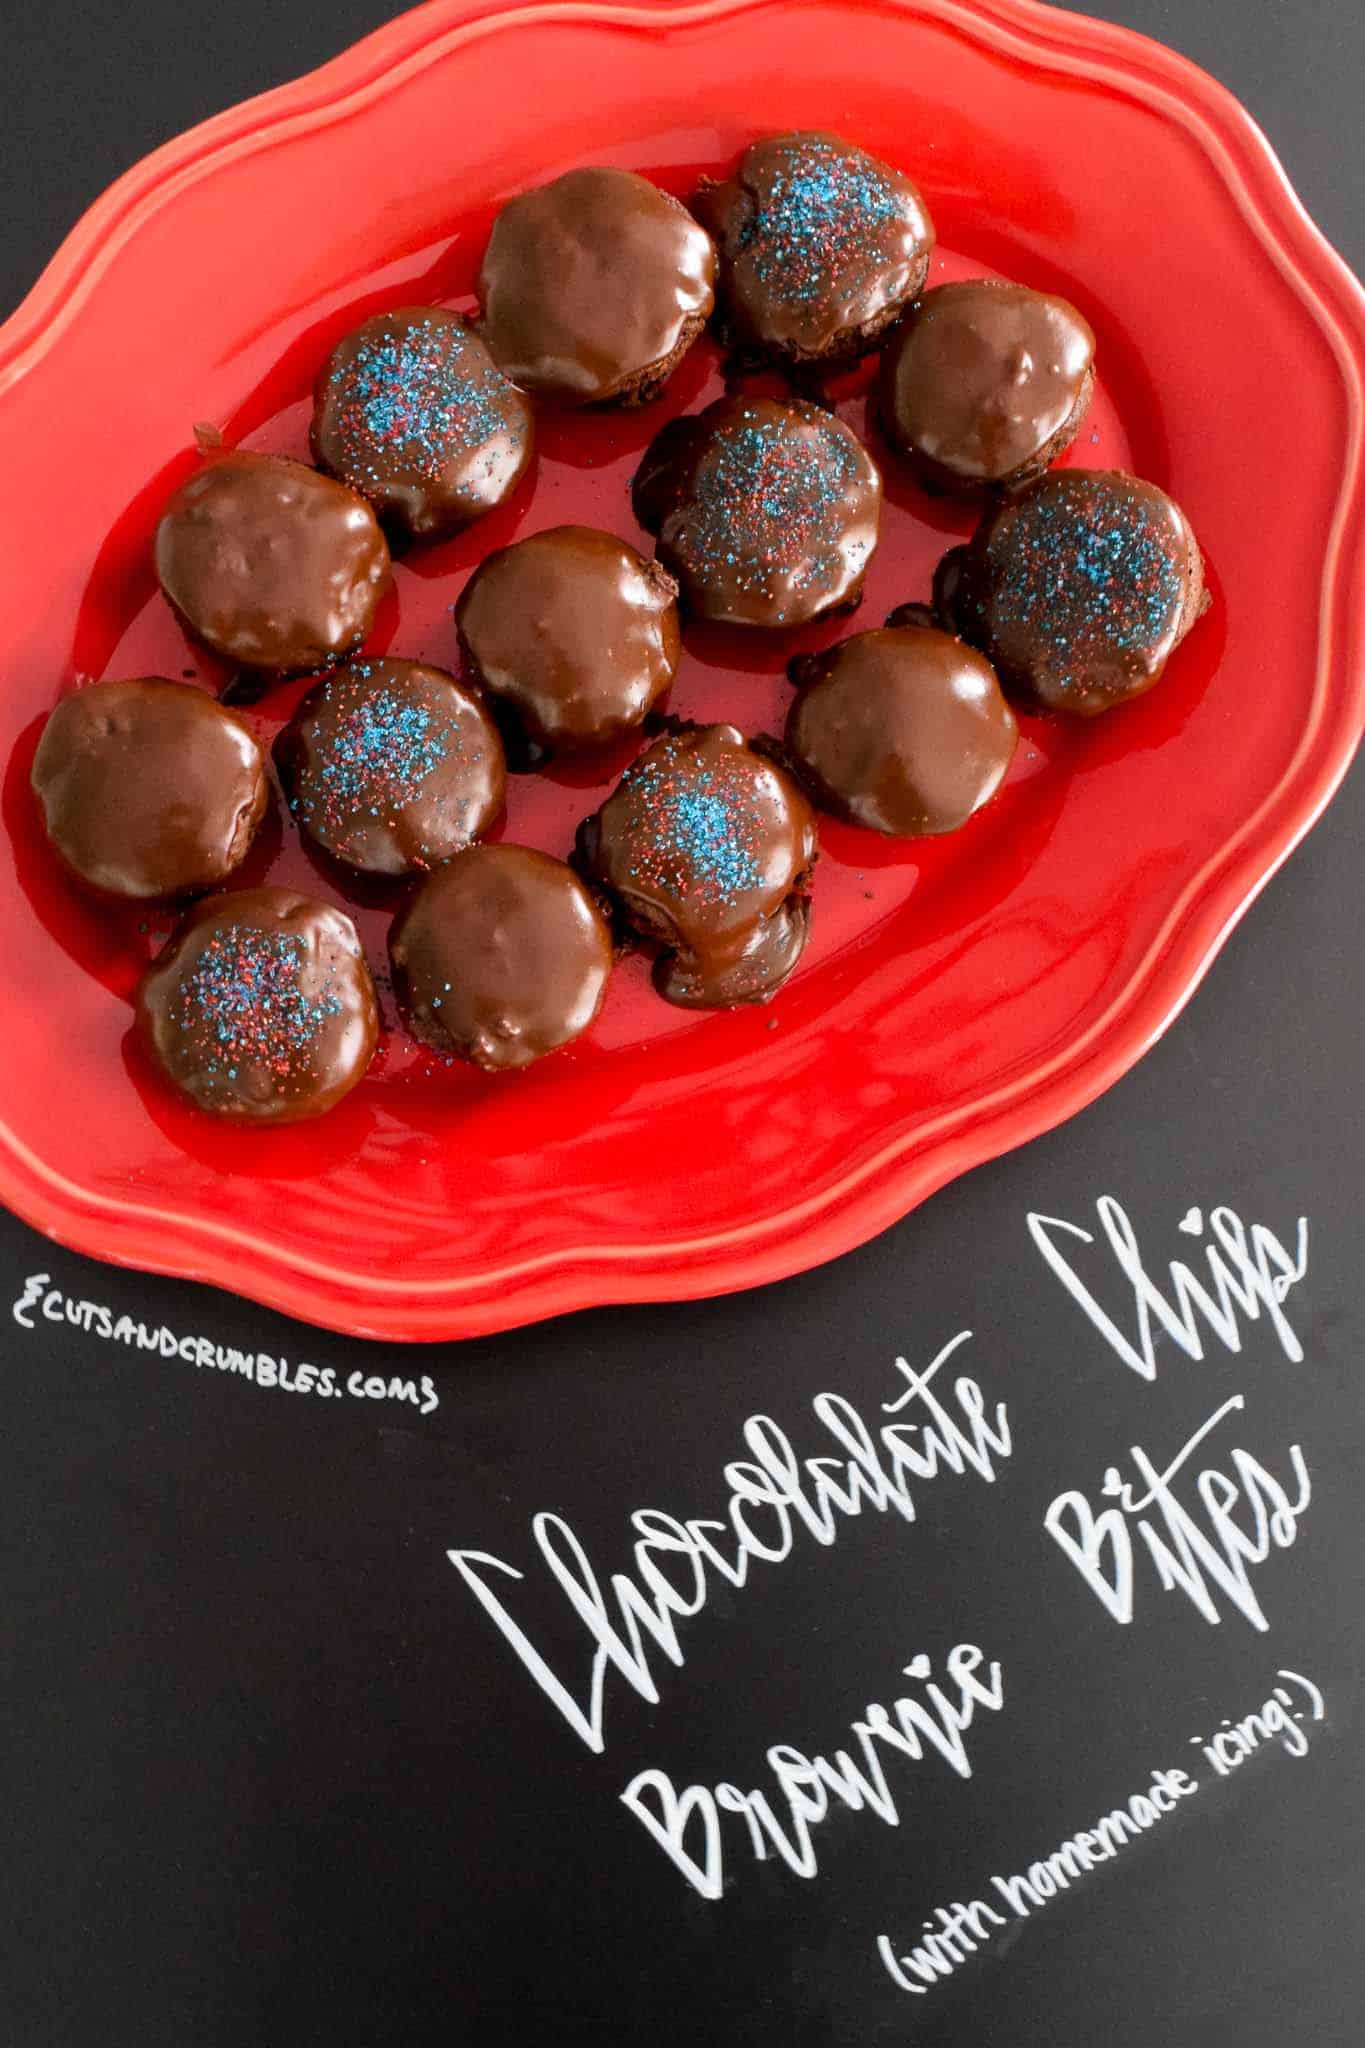 Chocolate Chip Brownie Bites with Homemade Icing on red platter with title written on chalkboard